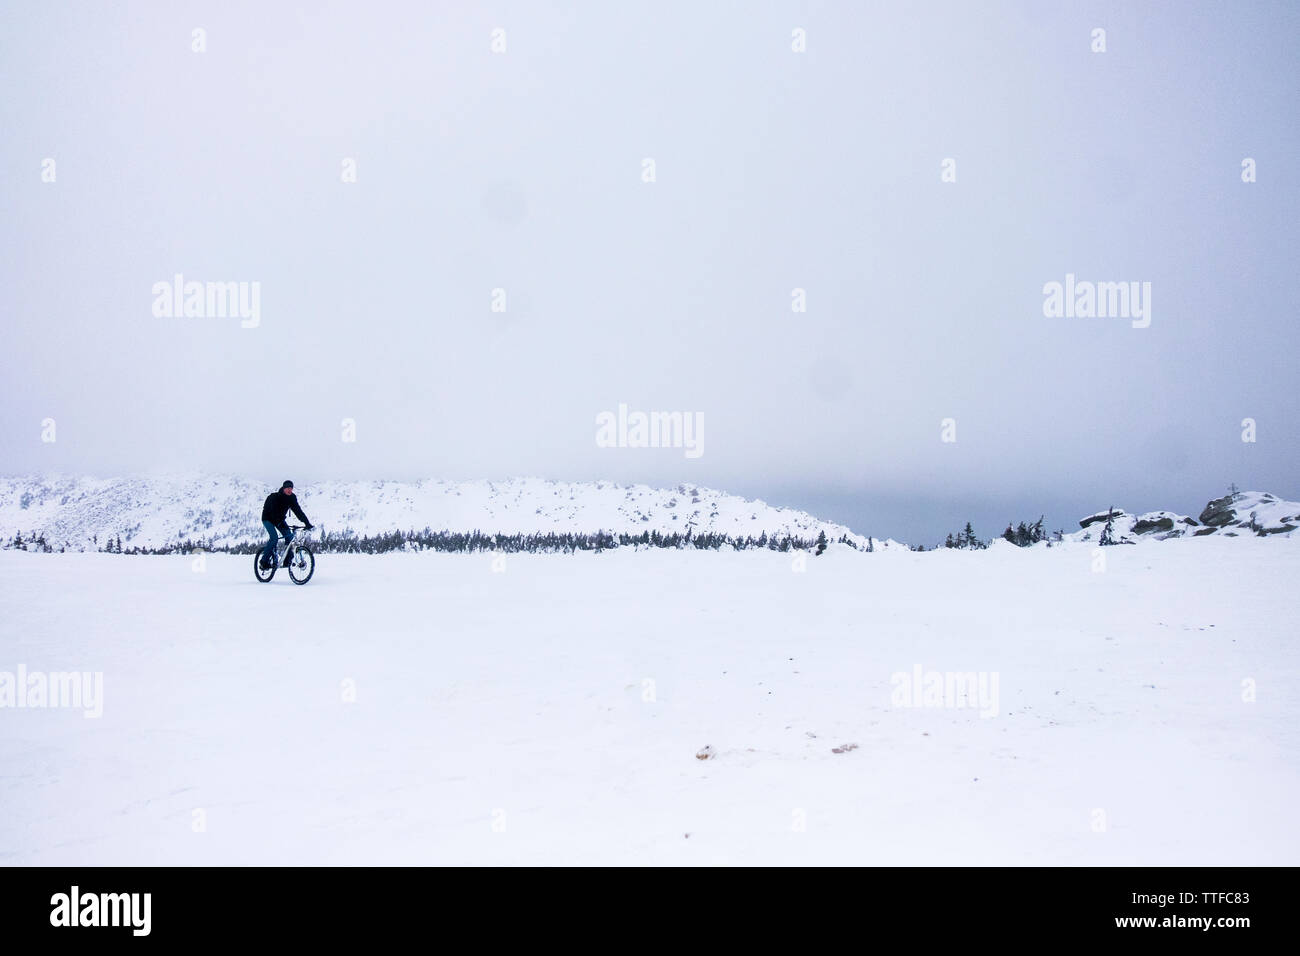 Man riding bicycle on snow covered field Stock Photo